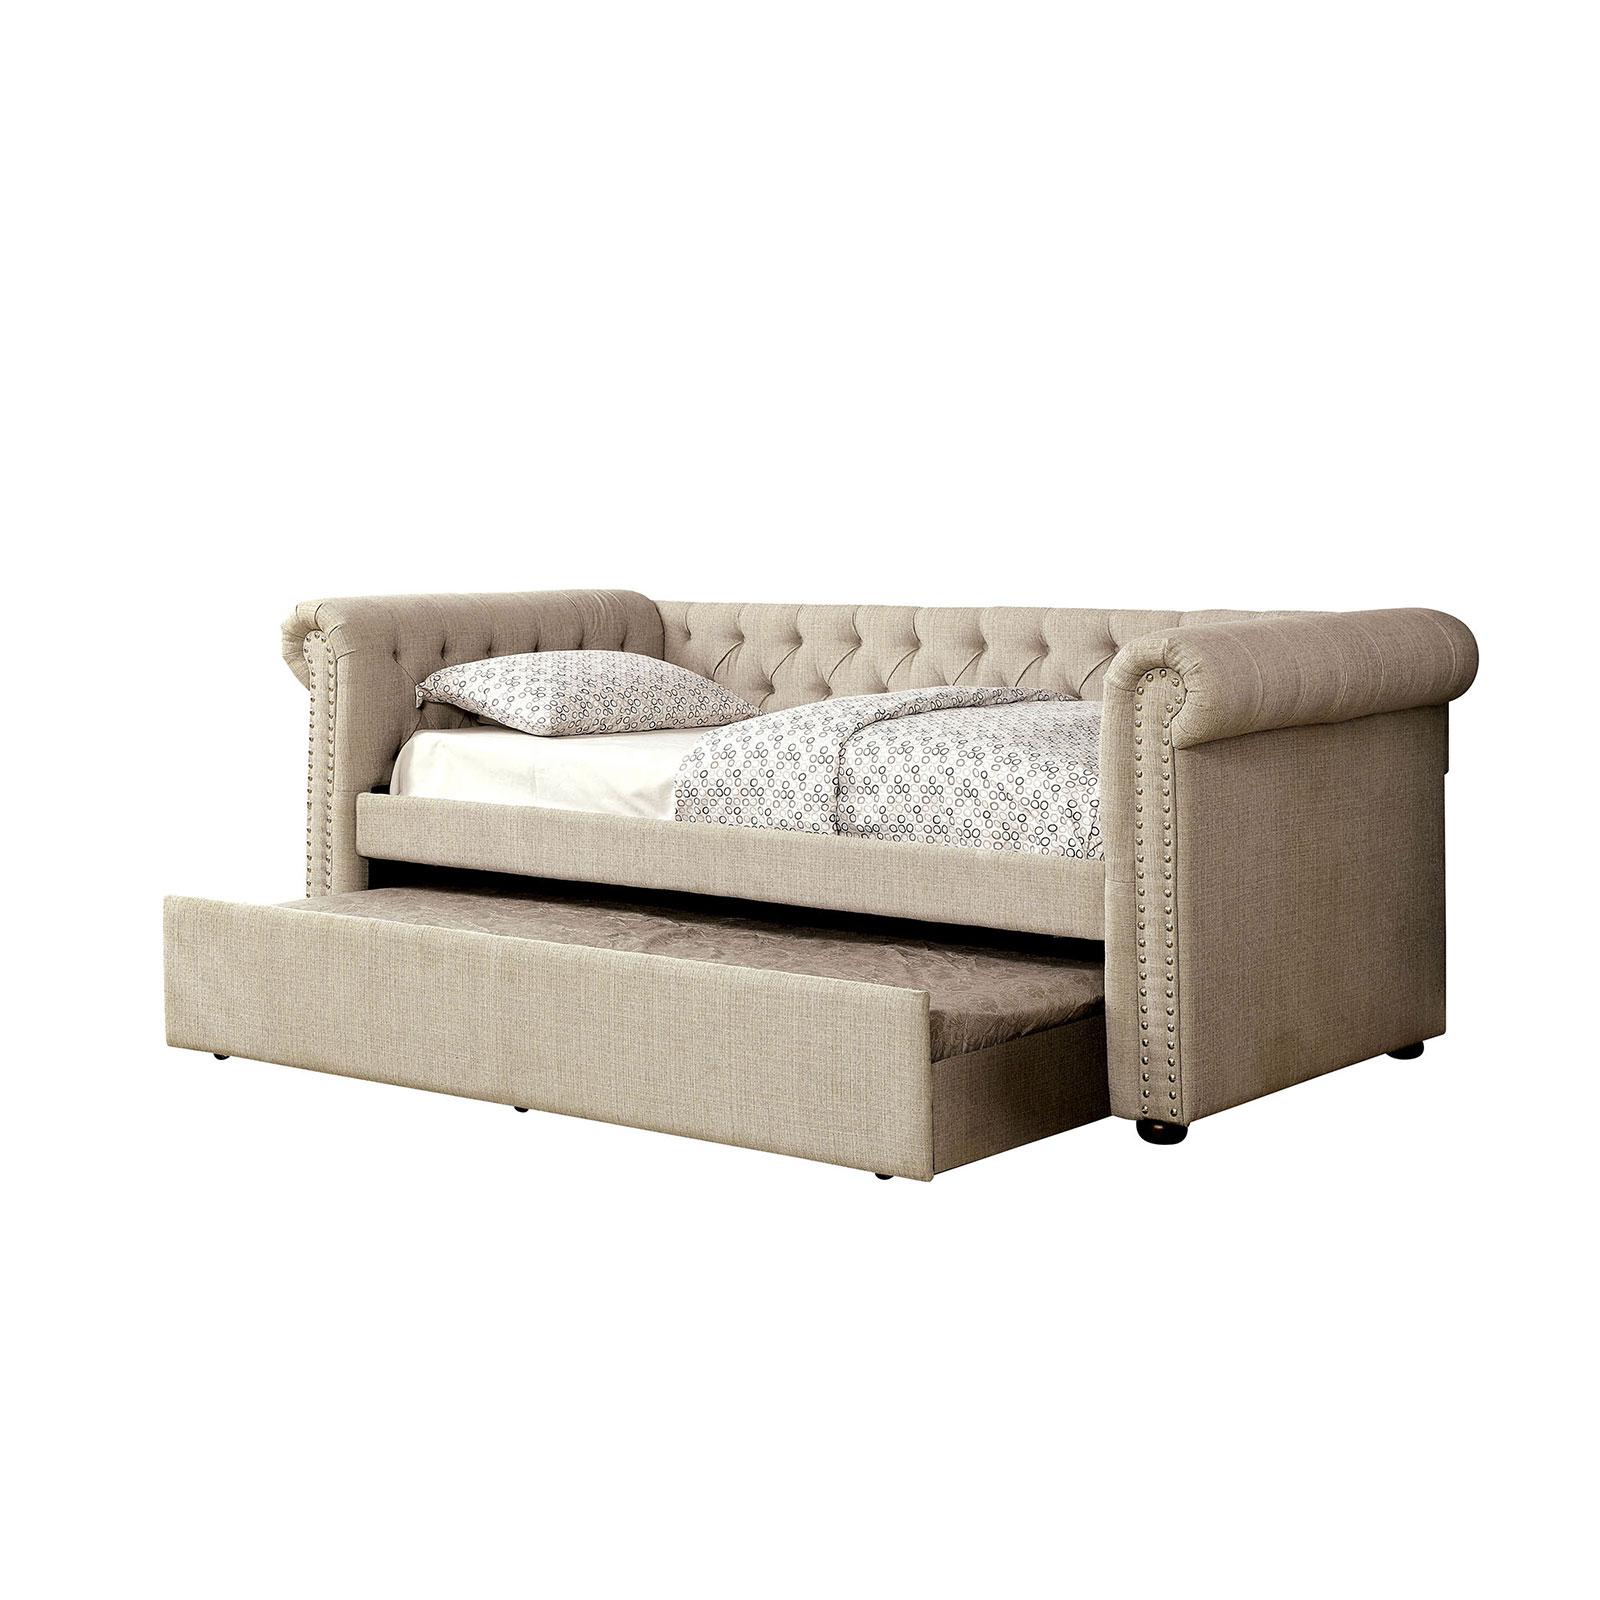 Furniture of America Leanna Daybed